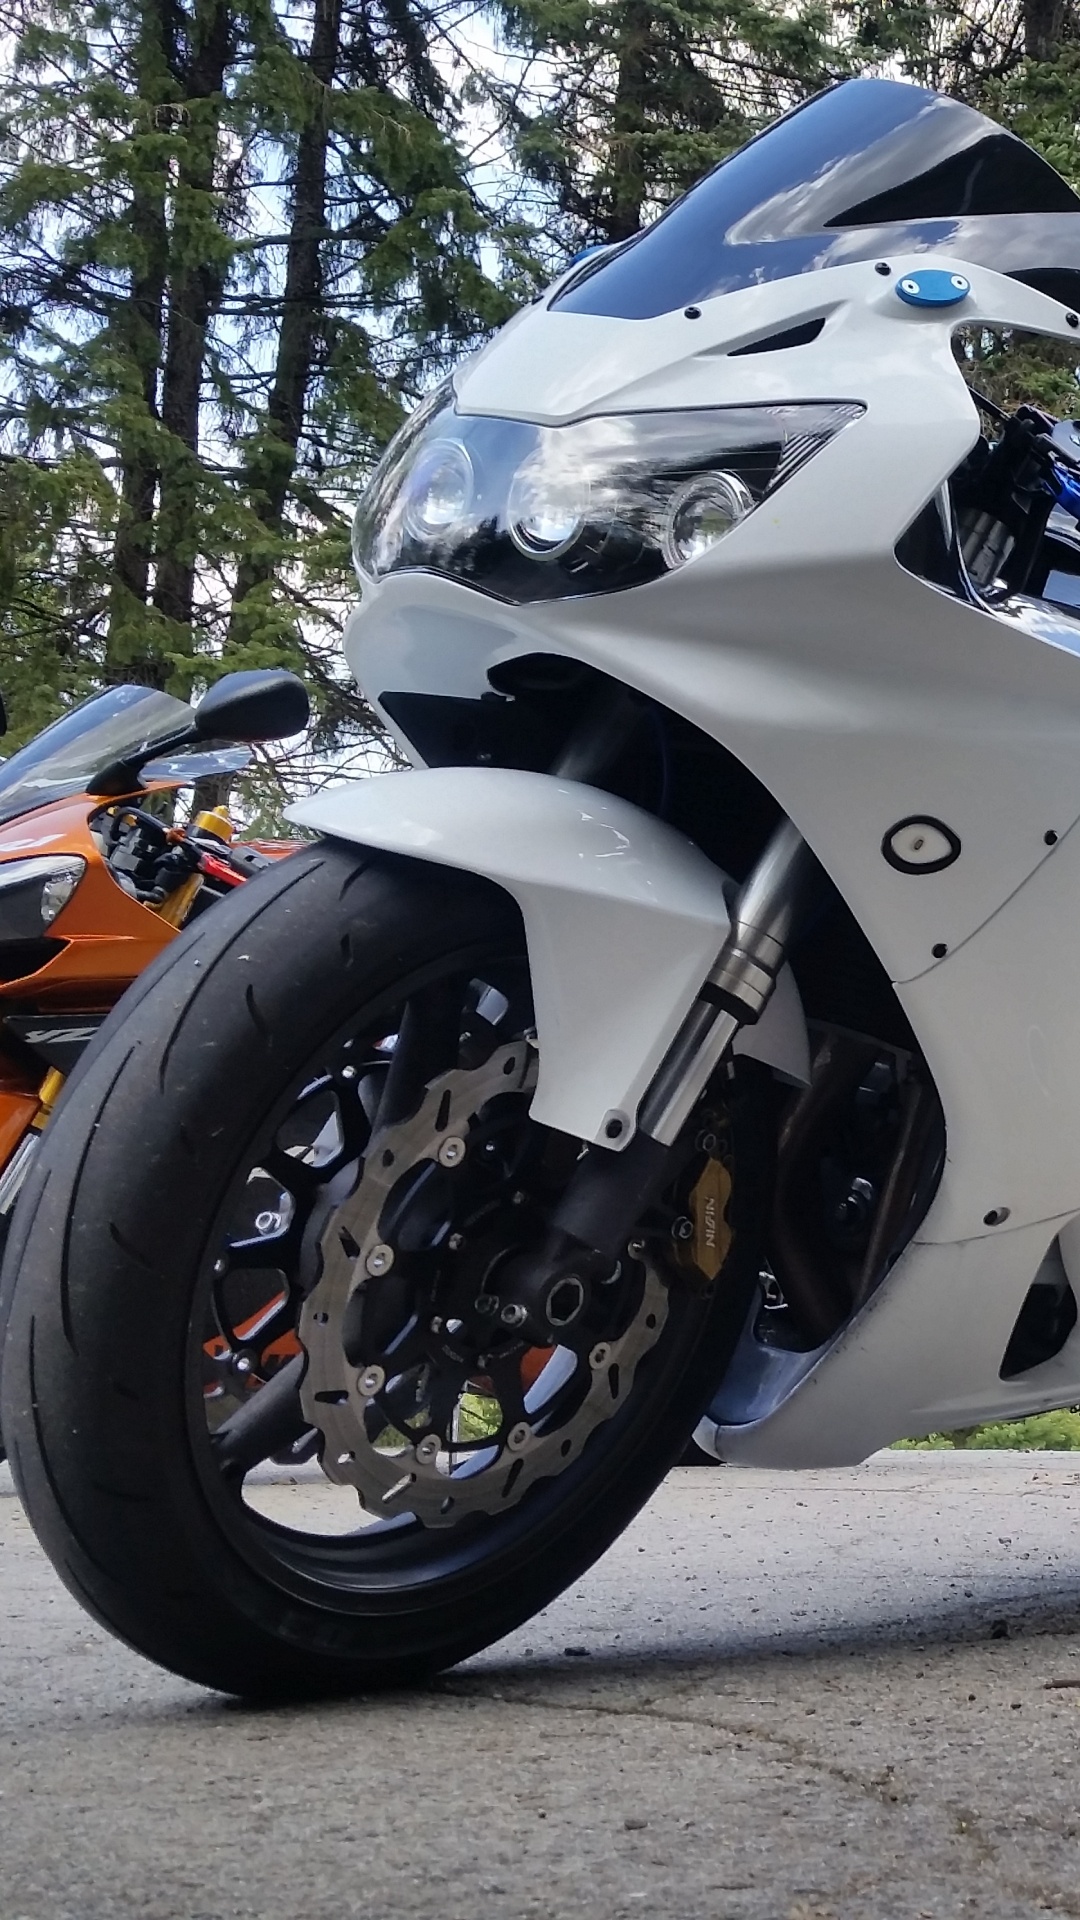 White and Black Sports Bike Parked on Dirt Road During Daytime. Wallpaper in 1080x1920 Resolution